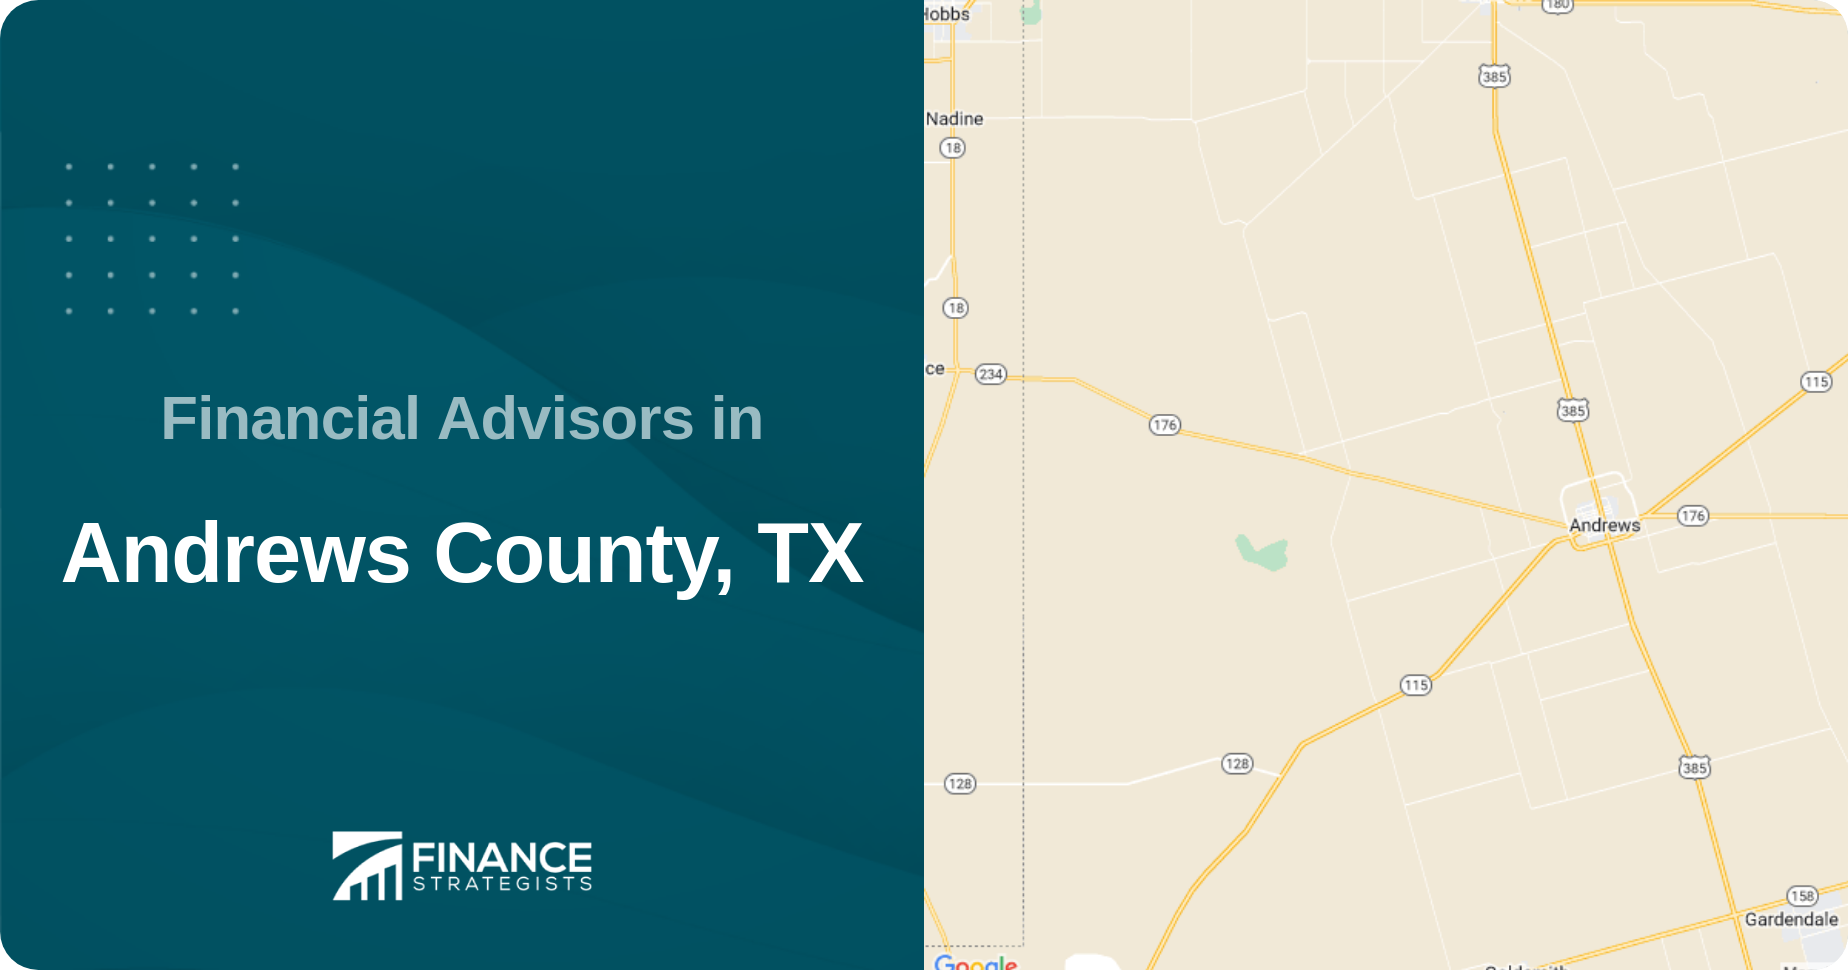 Financial Advisors in Andrews County, TX